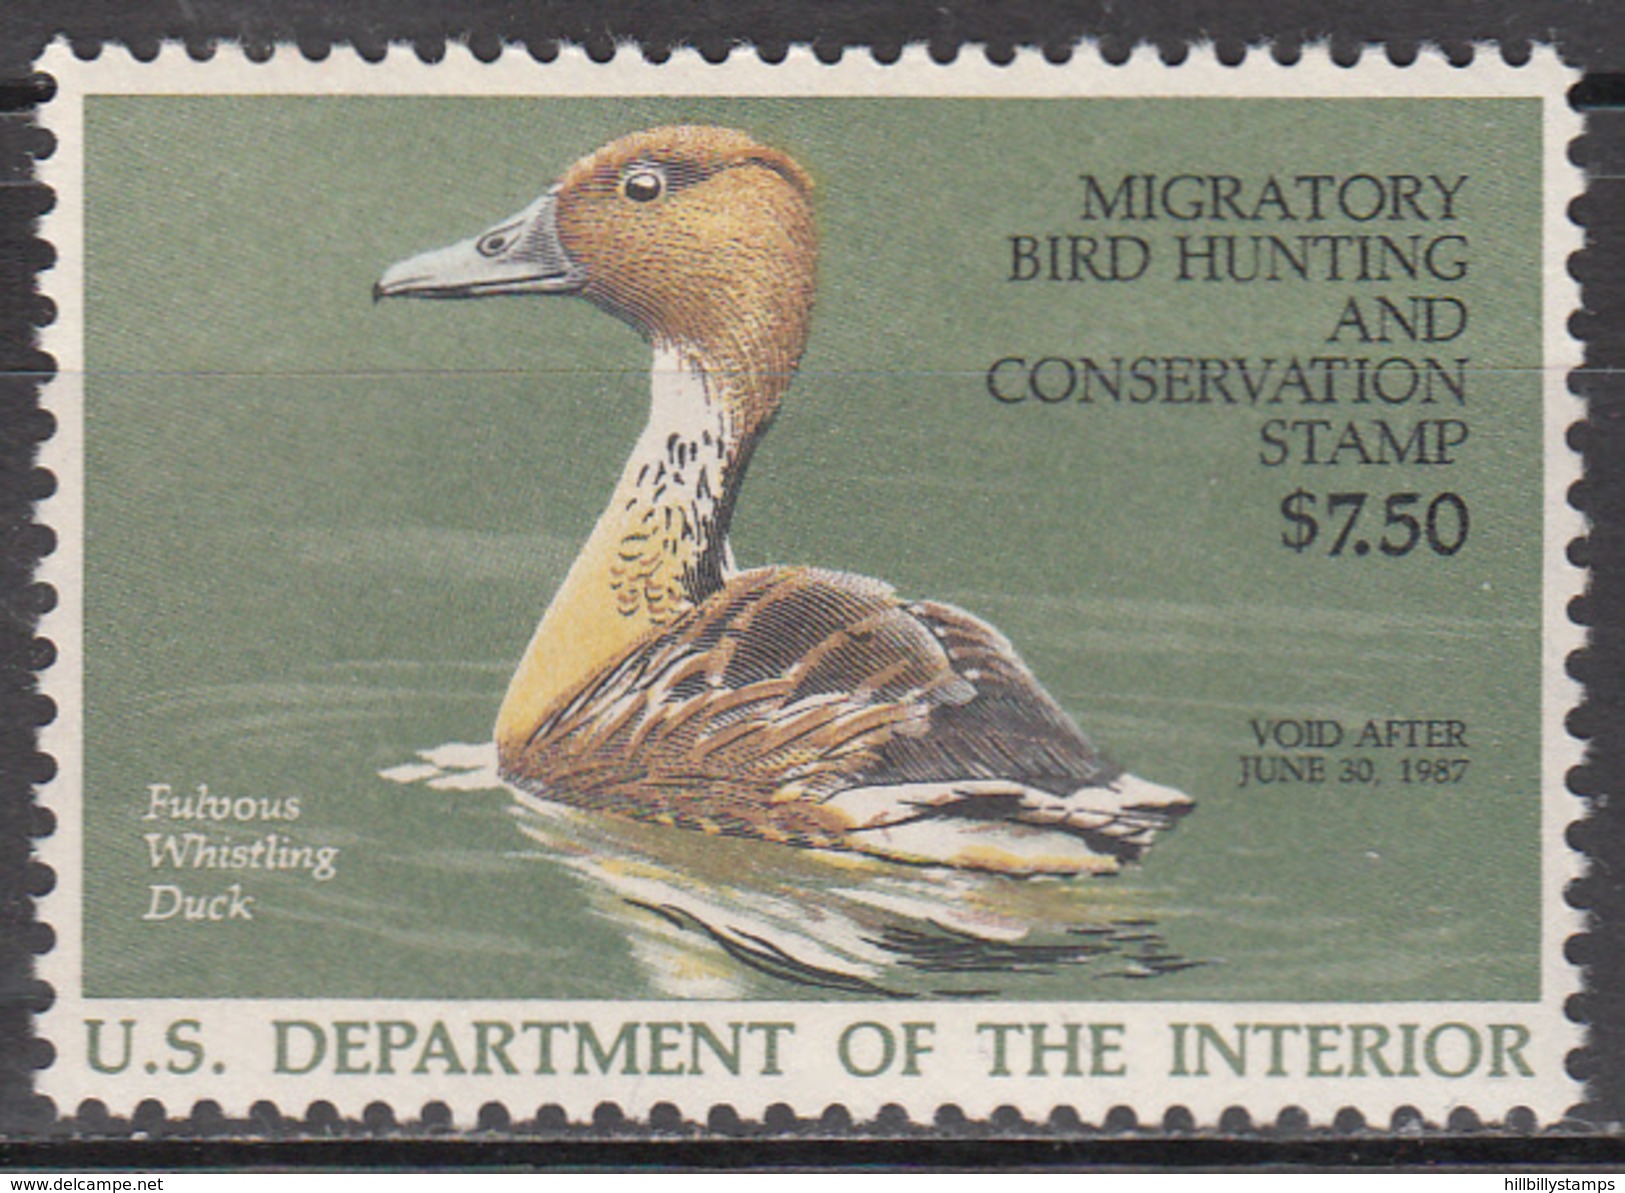 UNITED STATES    SCOTT NO. RW53    MINT HINGED     YEAR  1986 - Duck Stamps